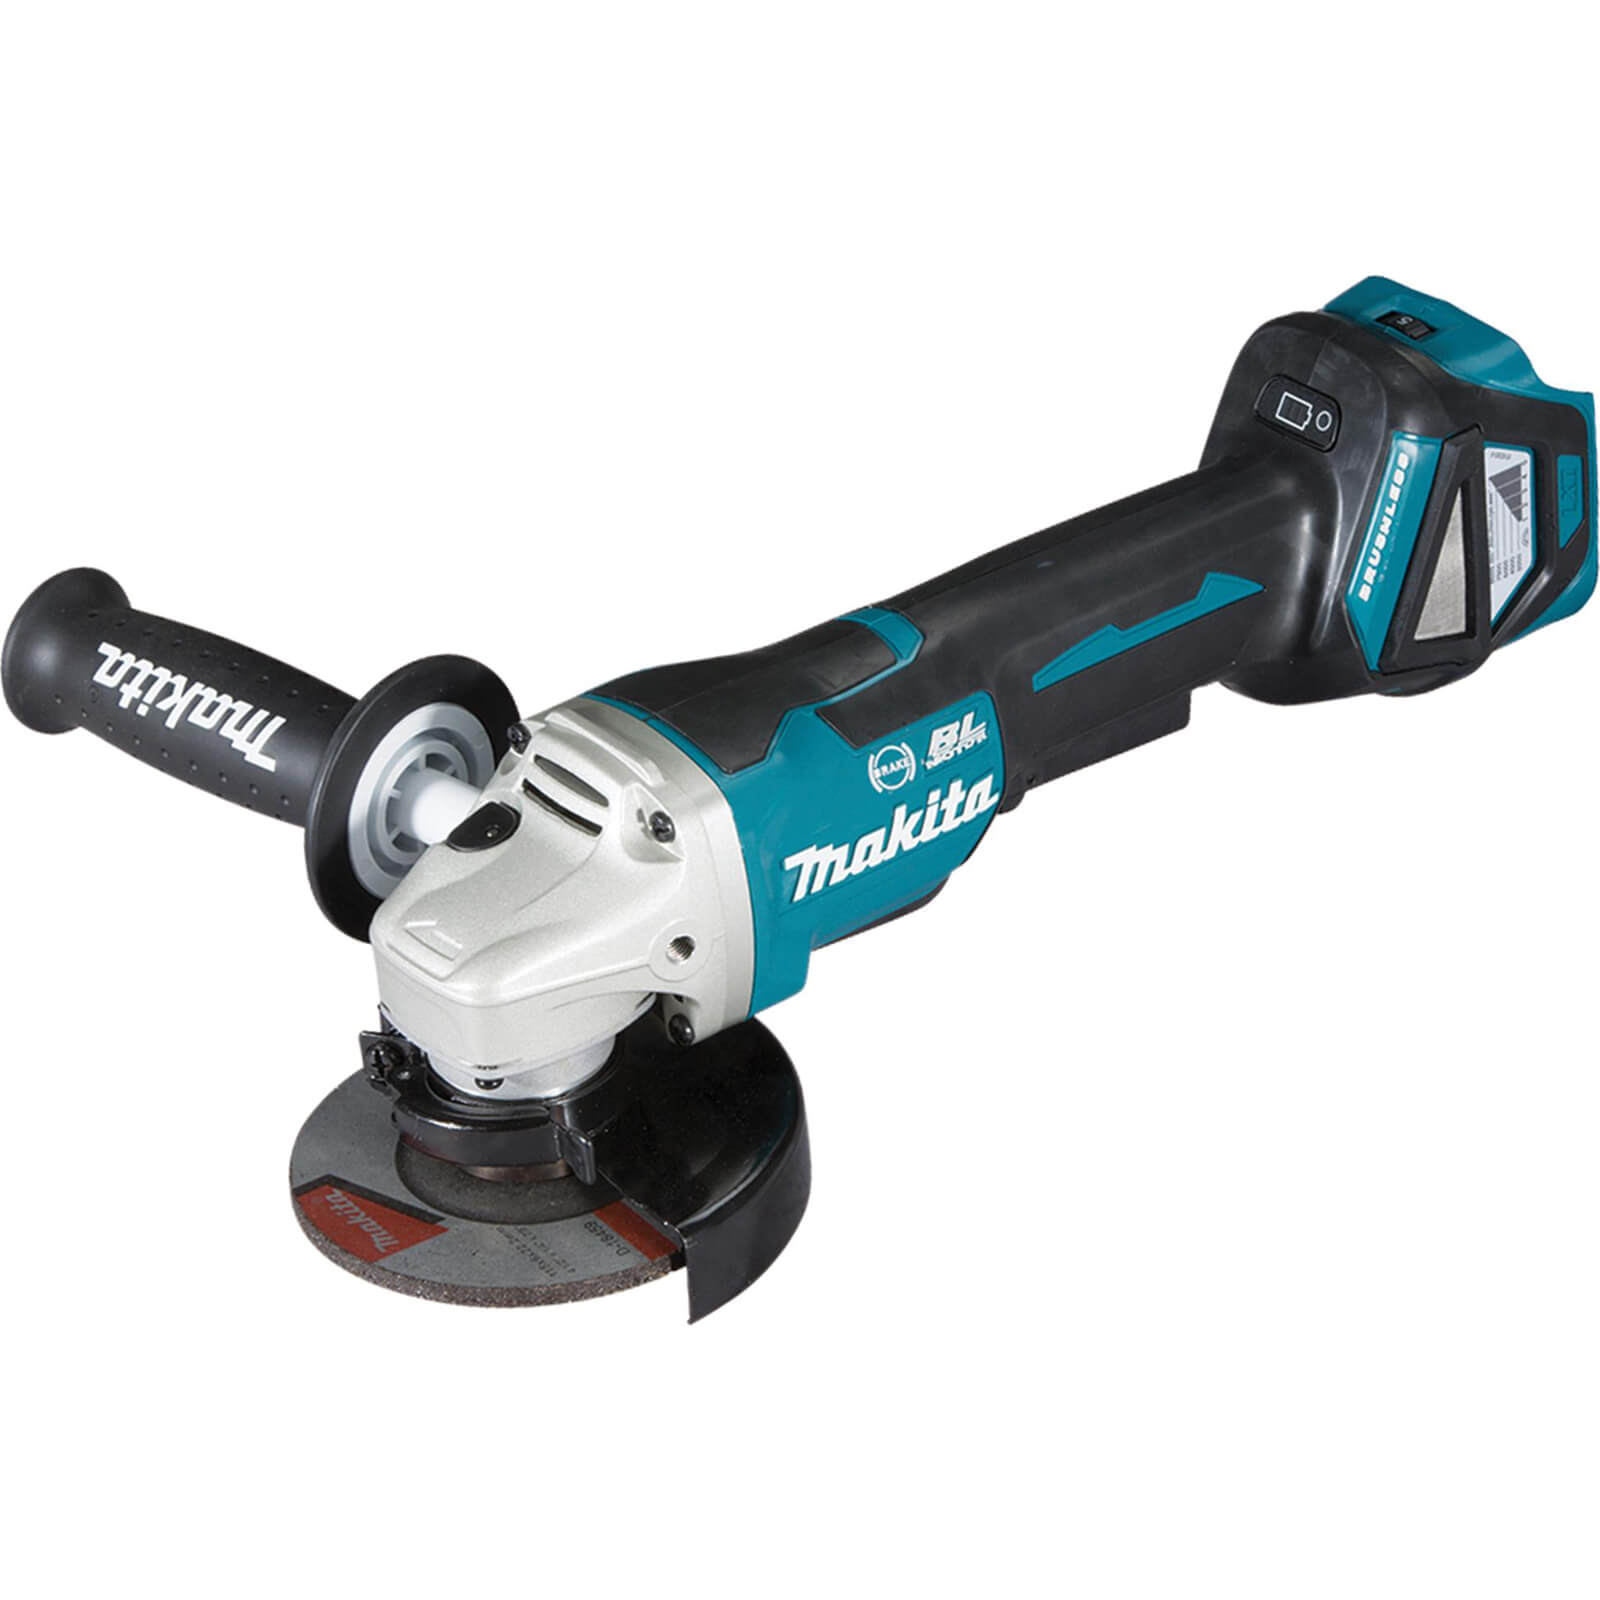 Image of Makita DGA467 18v LXT Cordless Brushless Paddle Switch Angle Grinder 115mm No Batteries No Charger No Case